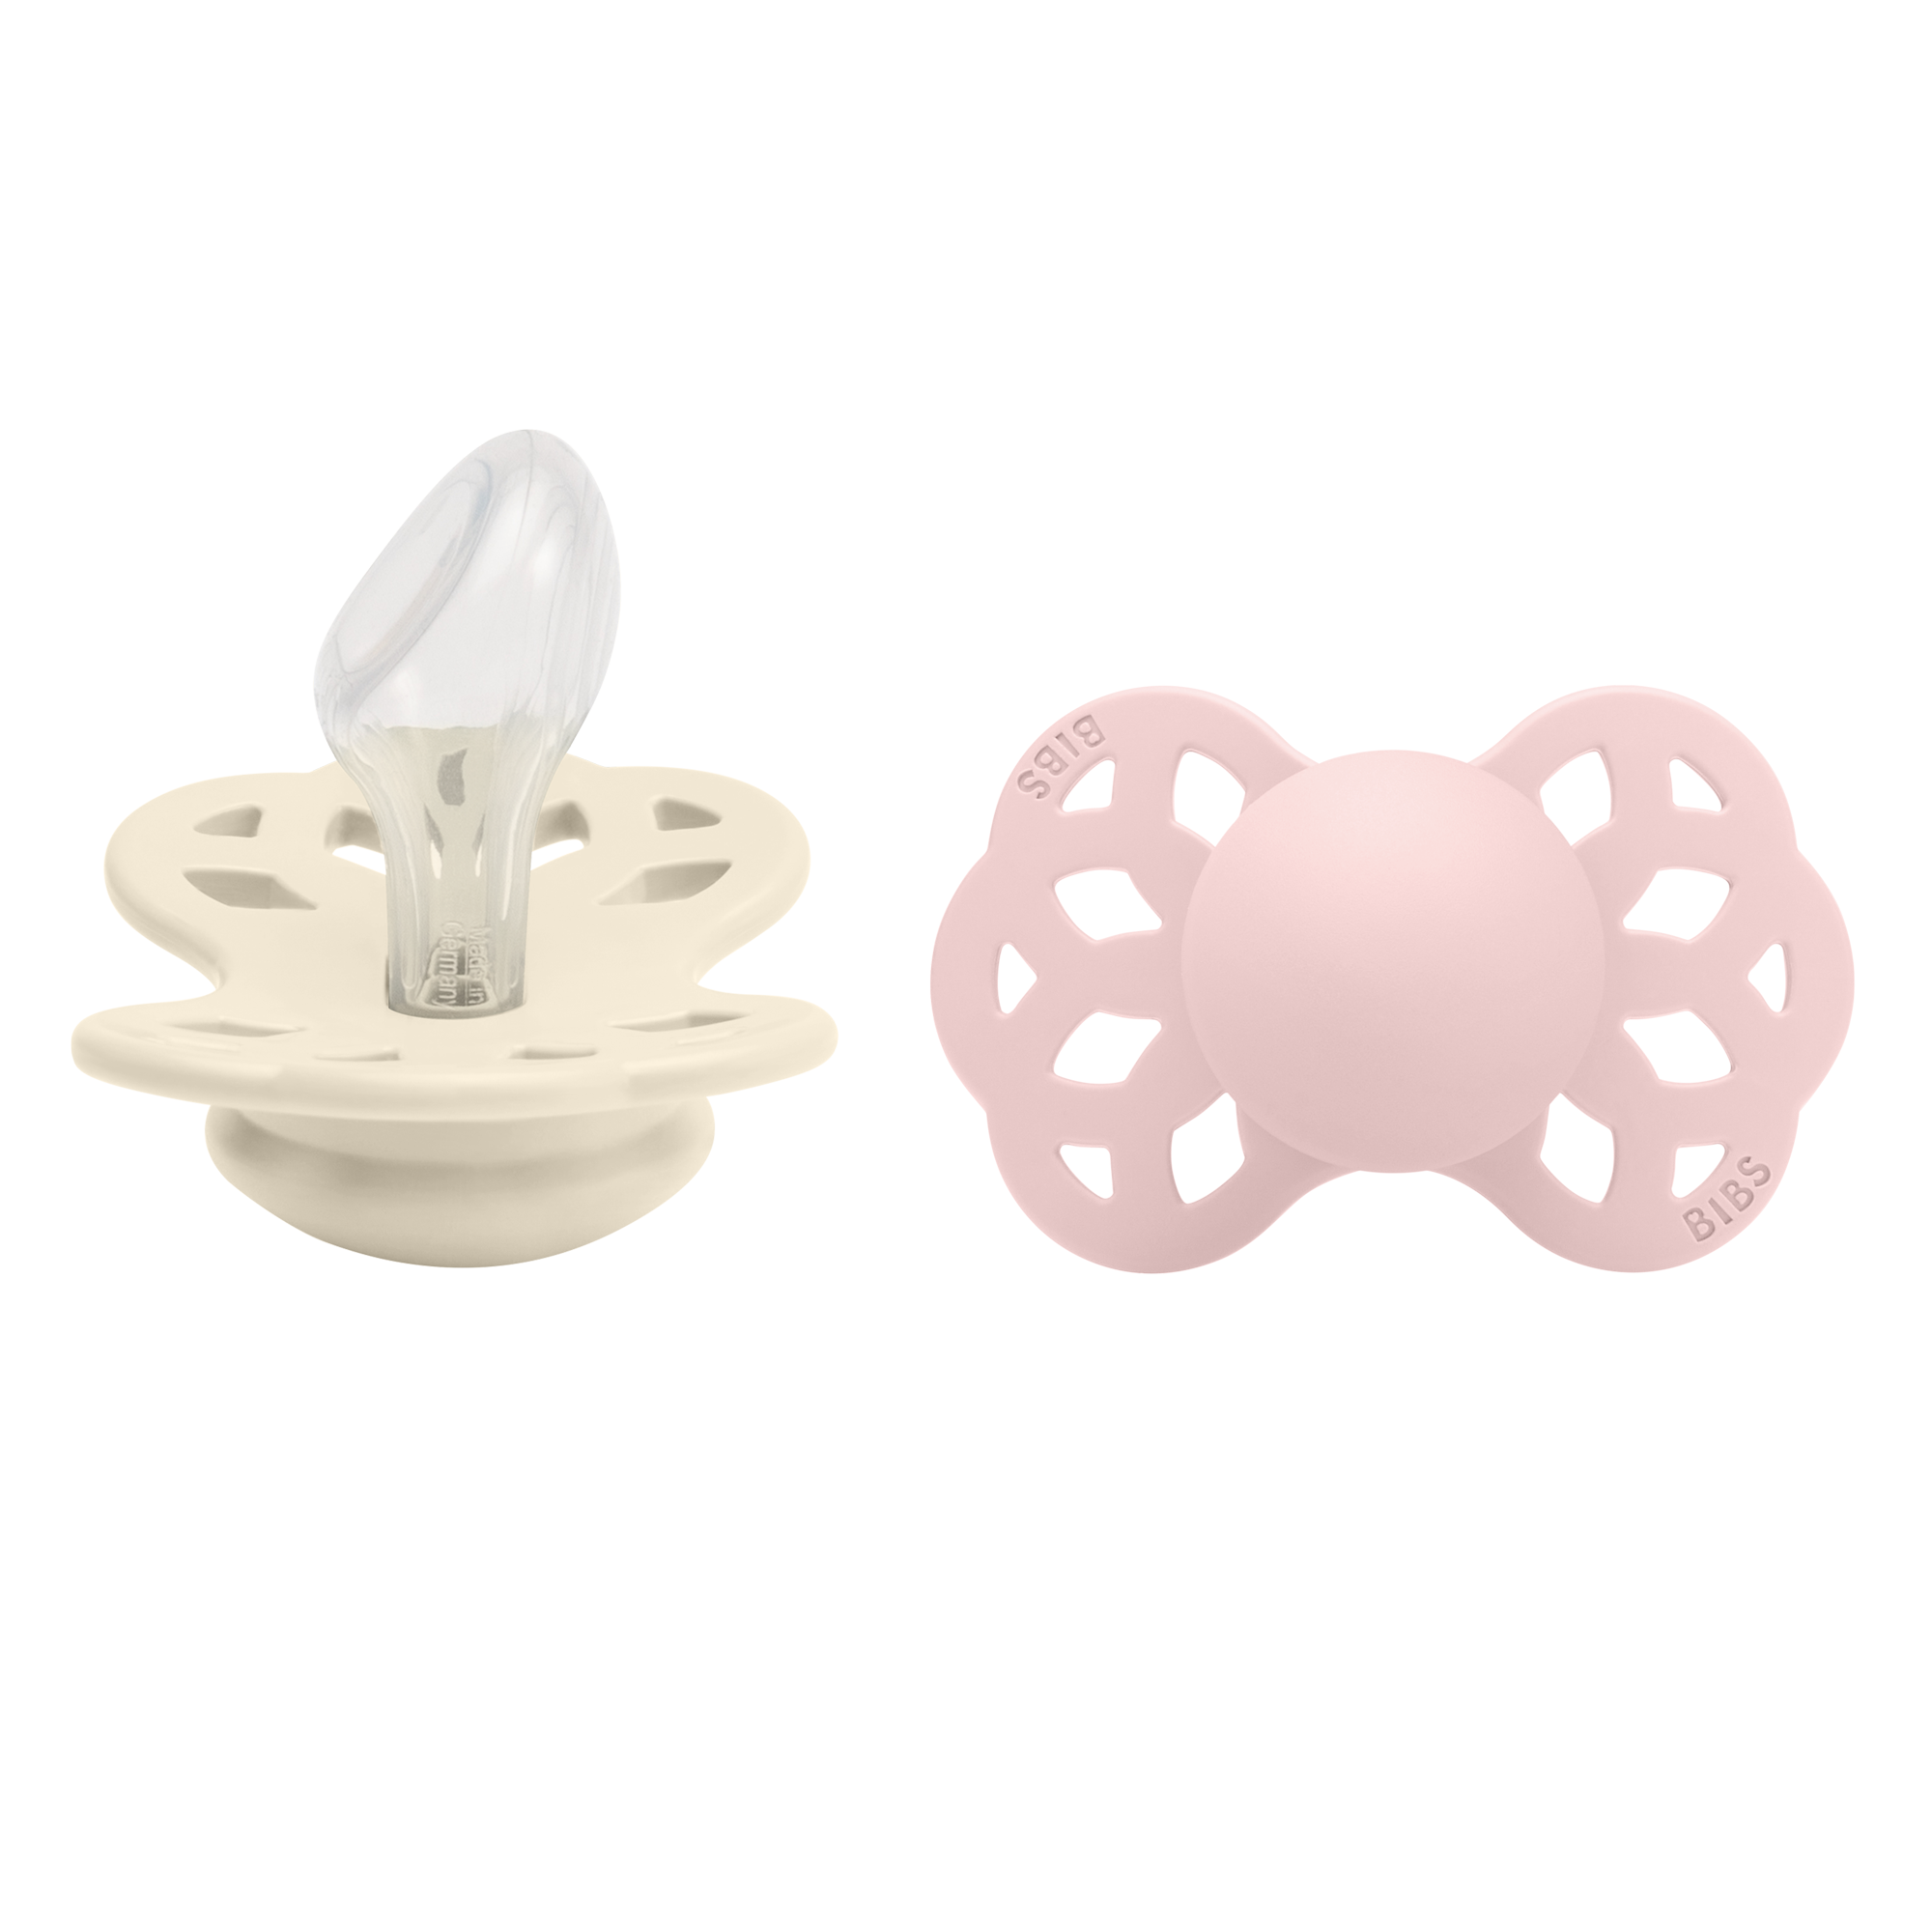 Bibs Infinity 2 Pack Silicone Anatomical Size 2 Ivory/Blush